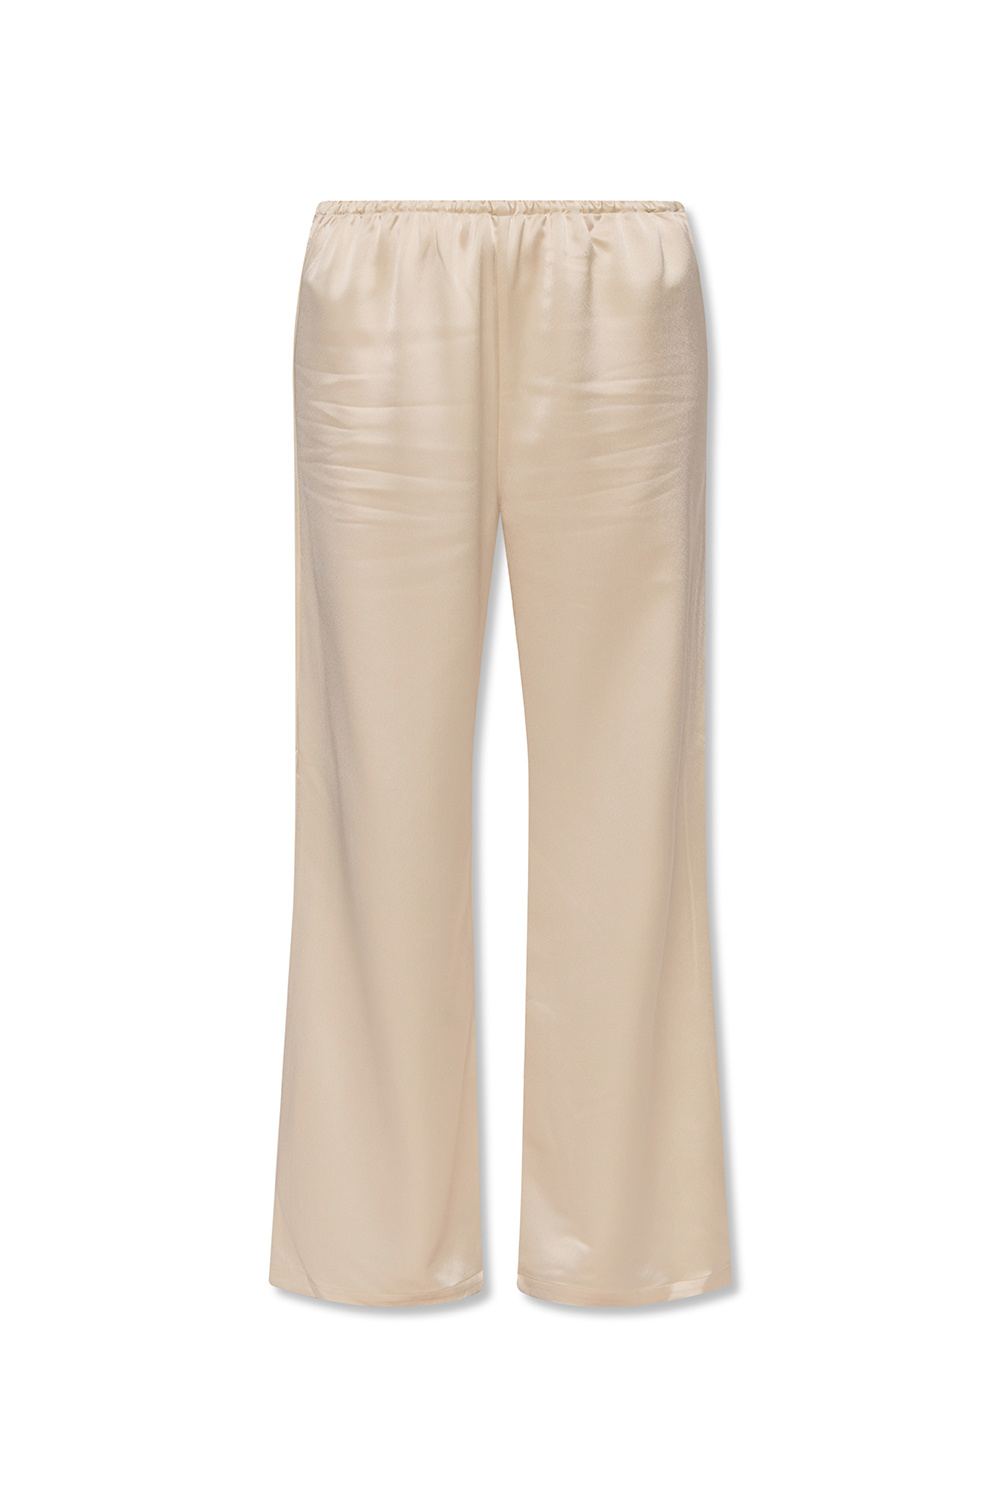 Toteme Glossy trousers